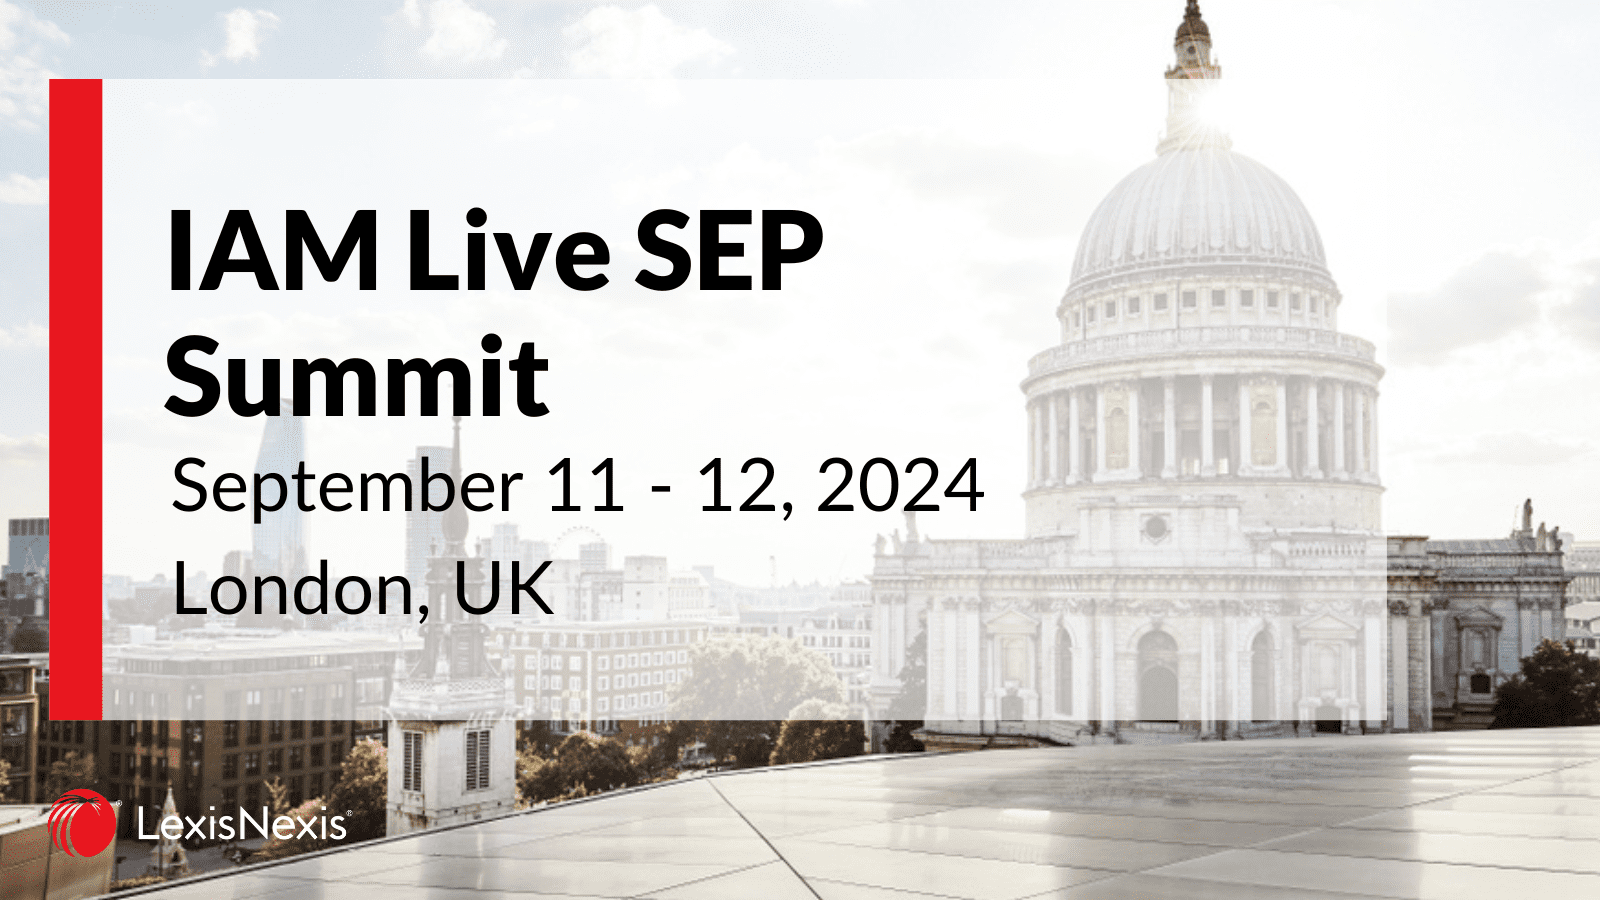 IAM Live SEP Summit 2024, against a backdrop of St Paul's Cathedral